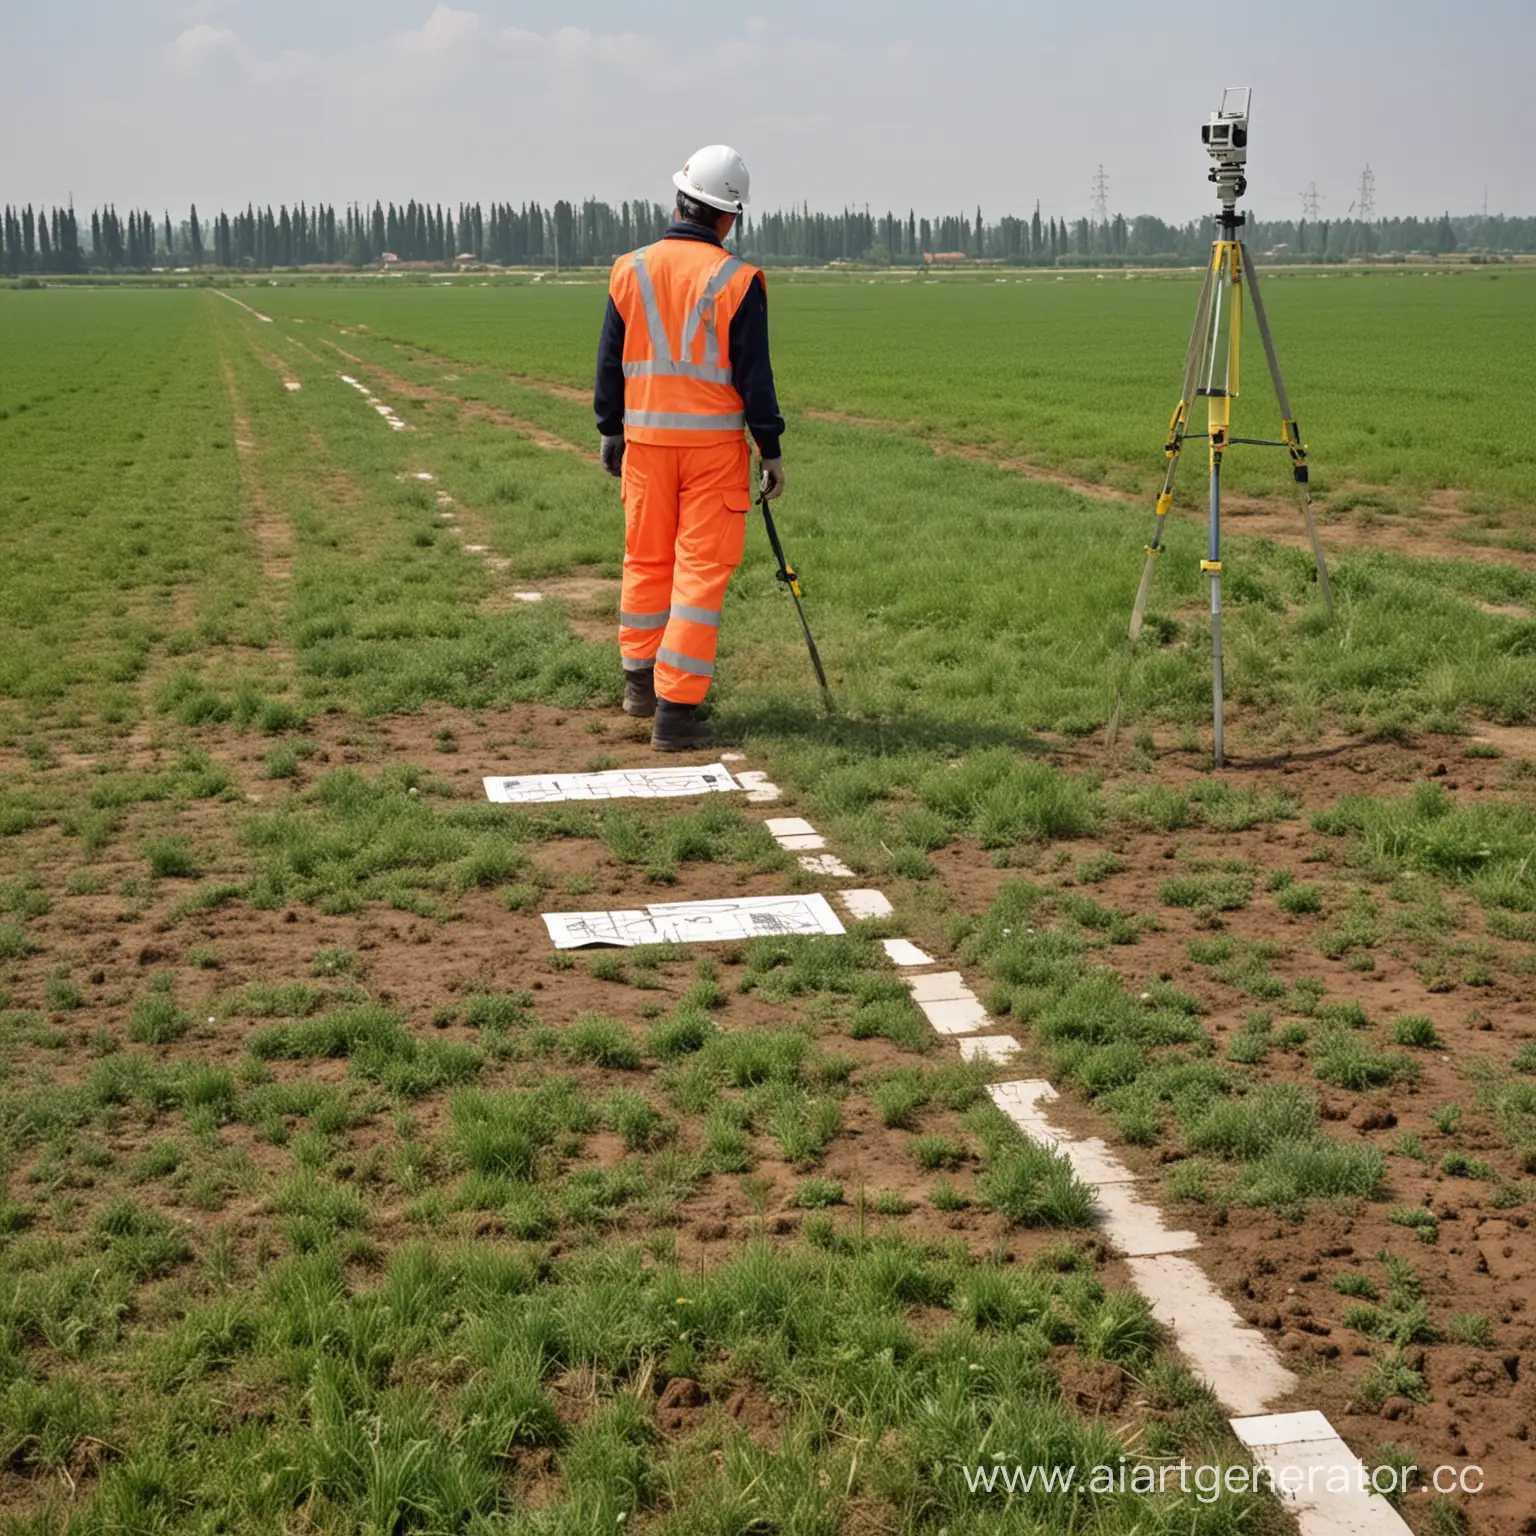 Cadastral-Engineer-in-Action-Precise-Land-Boundary-Demarcation